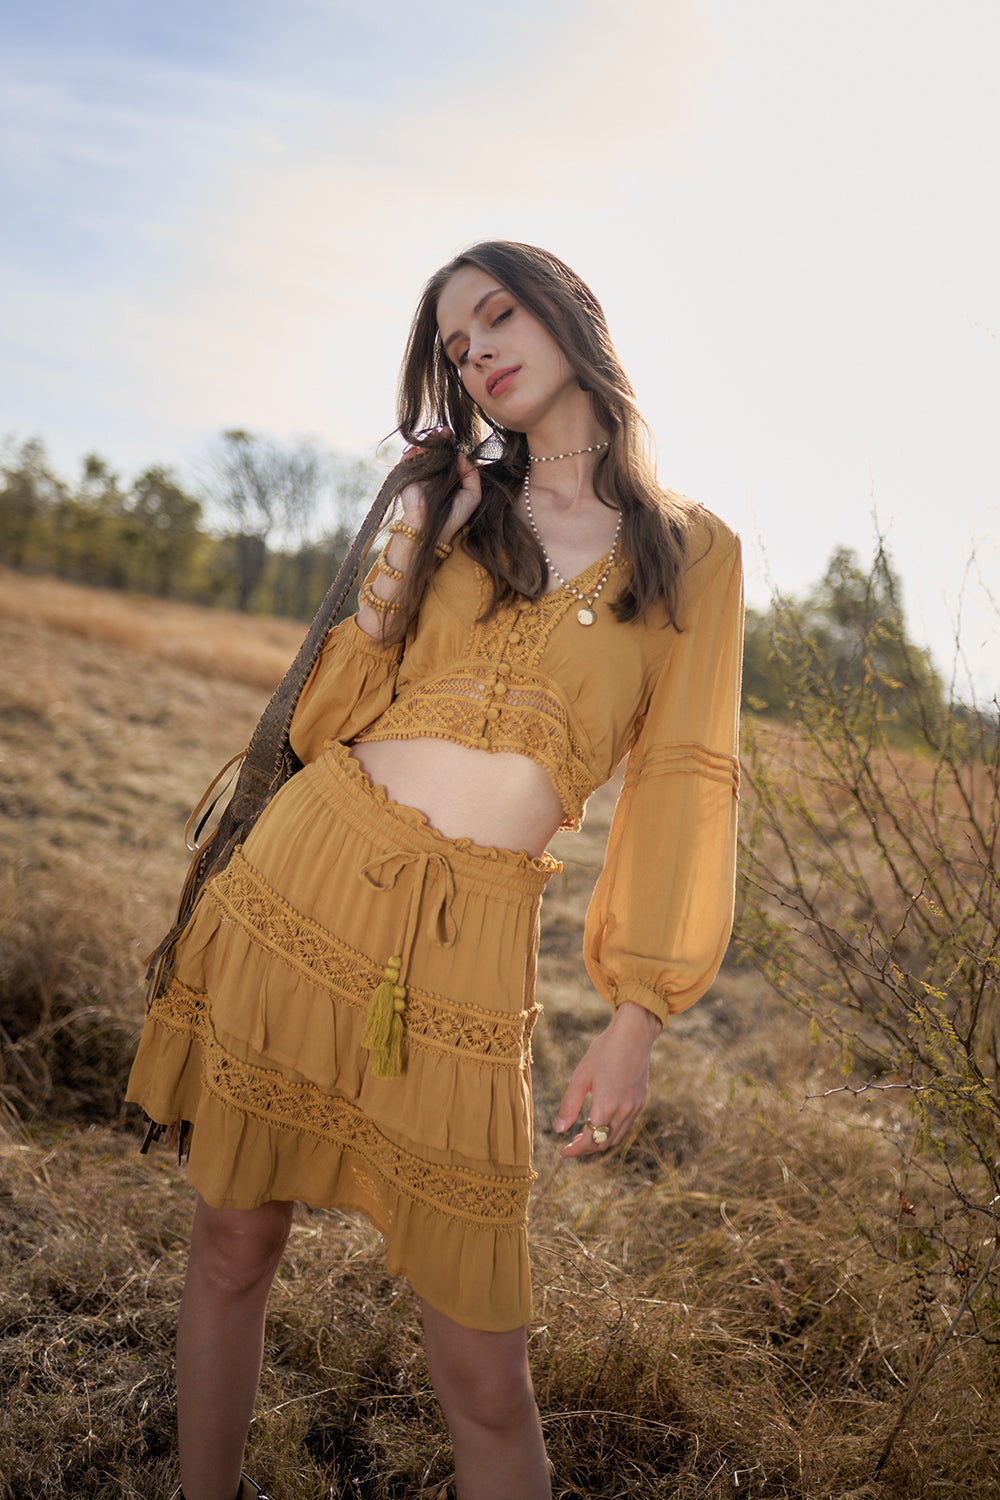 Maribelle Blouse - Saffron Gold - The Fields of Gold by Tulle and Batiste